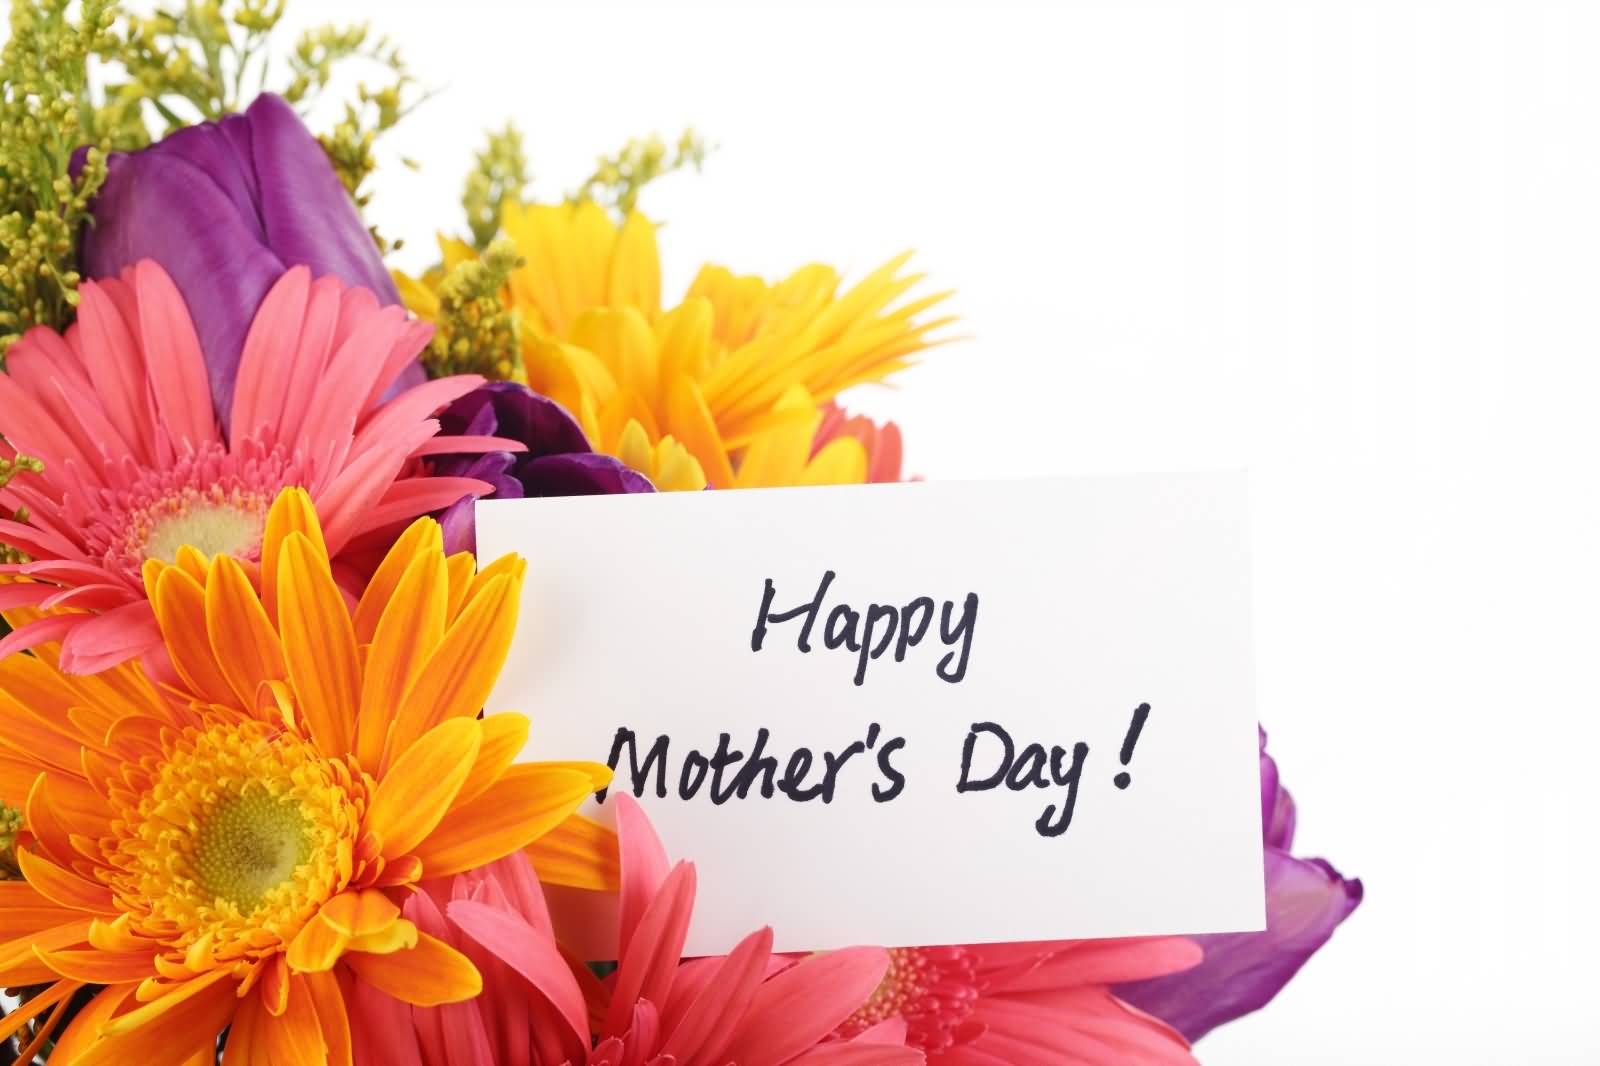 Happy Mother’s Day Note With Flowers